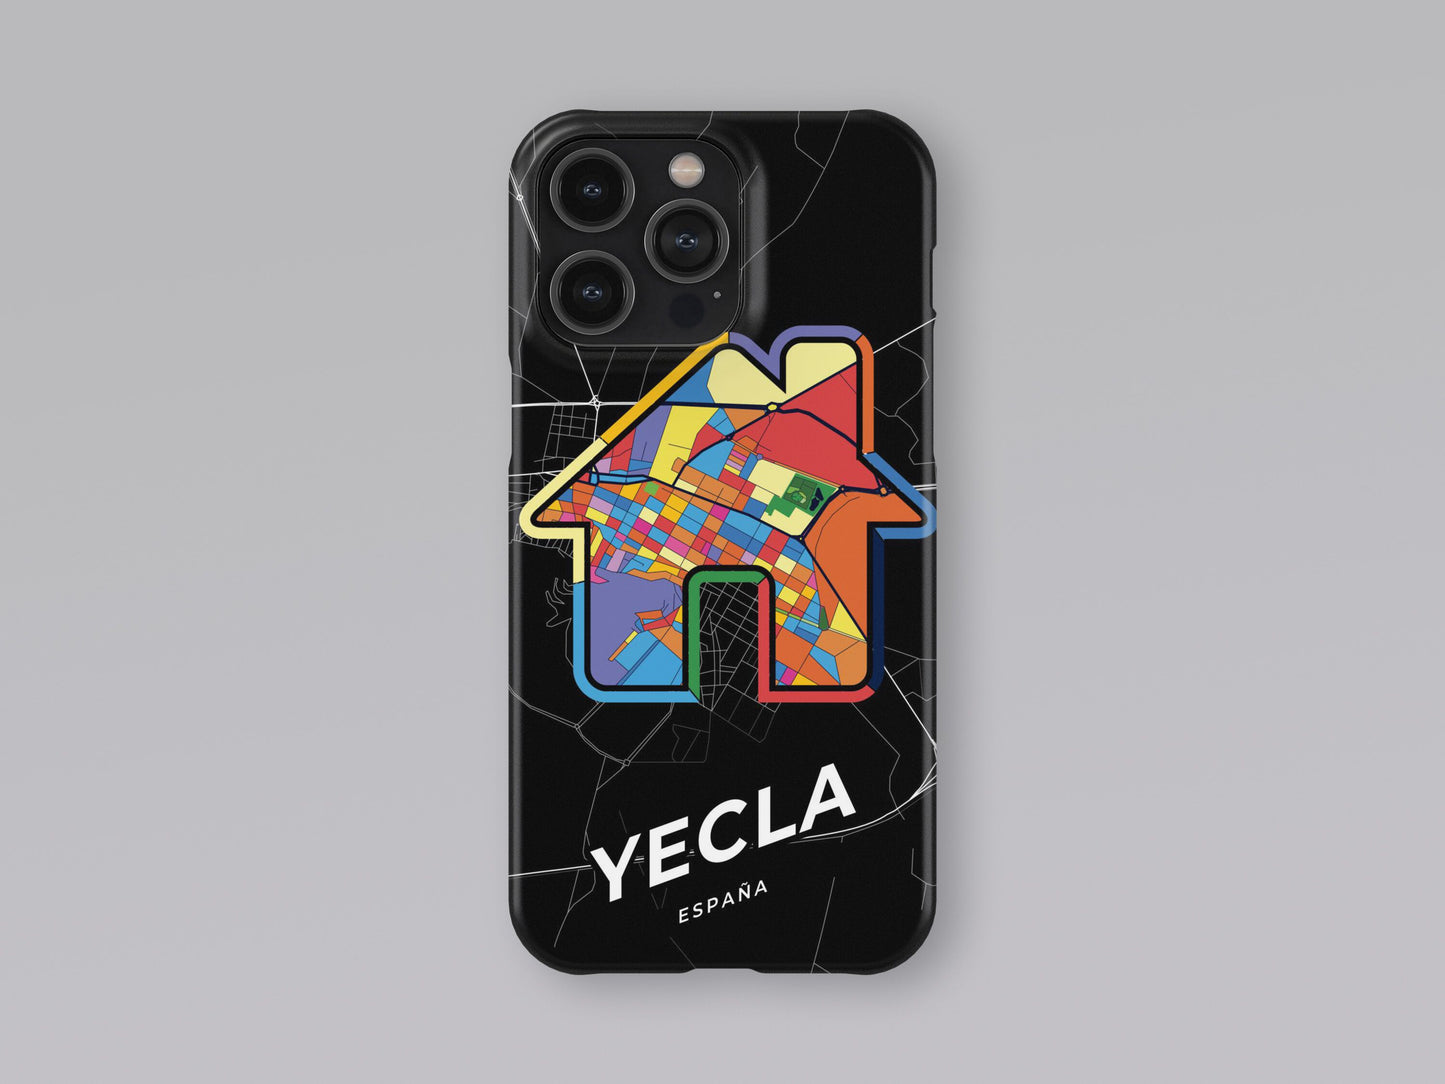 Yecla Spain slim phone case with colorful icon 3